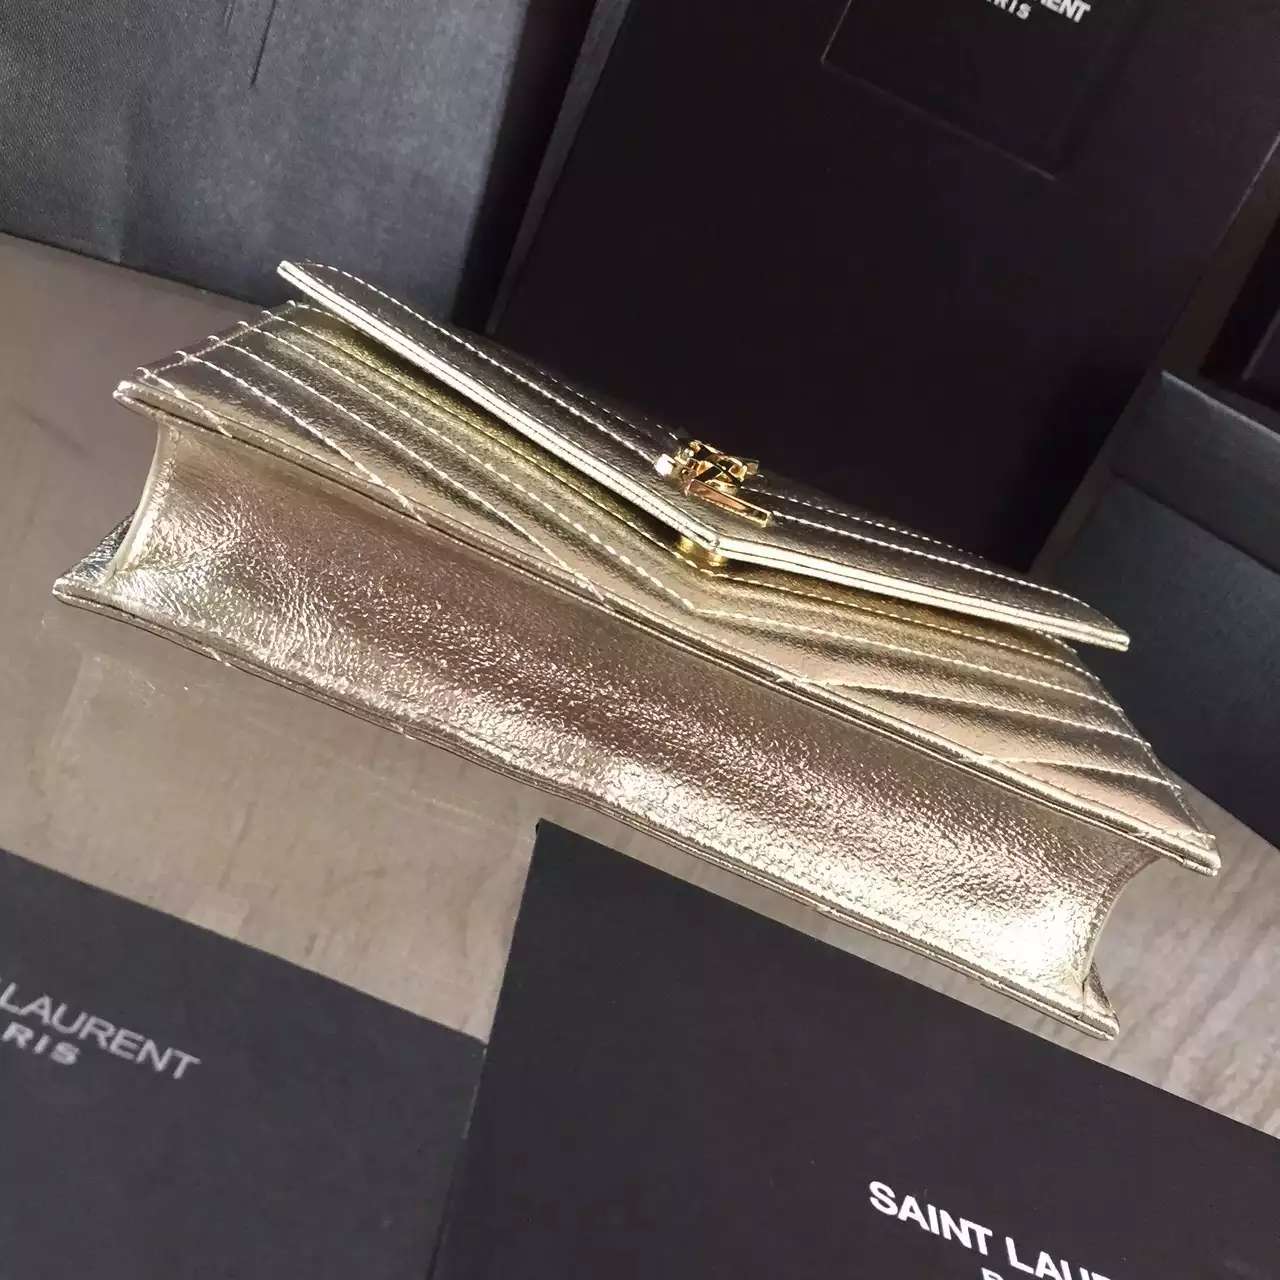 2016 Cheap YSL Out Sale with Free Shipping-Saint Laurent Monogram Envelope Chain Wallet in Pale Gold Grained Matelasse Metallic Leather - Click Image to Close